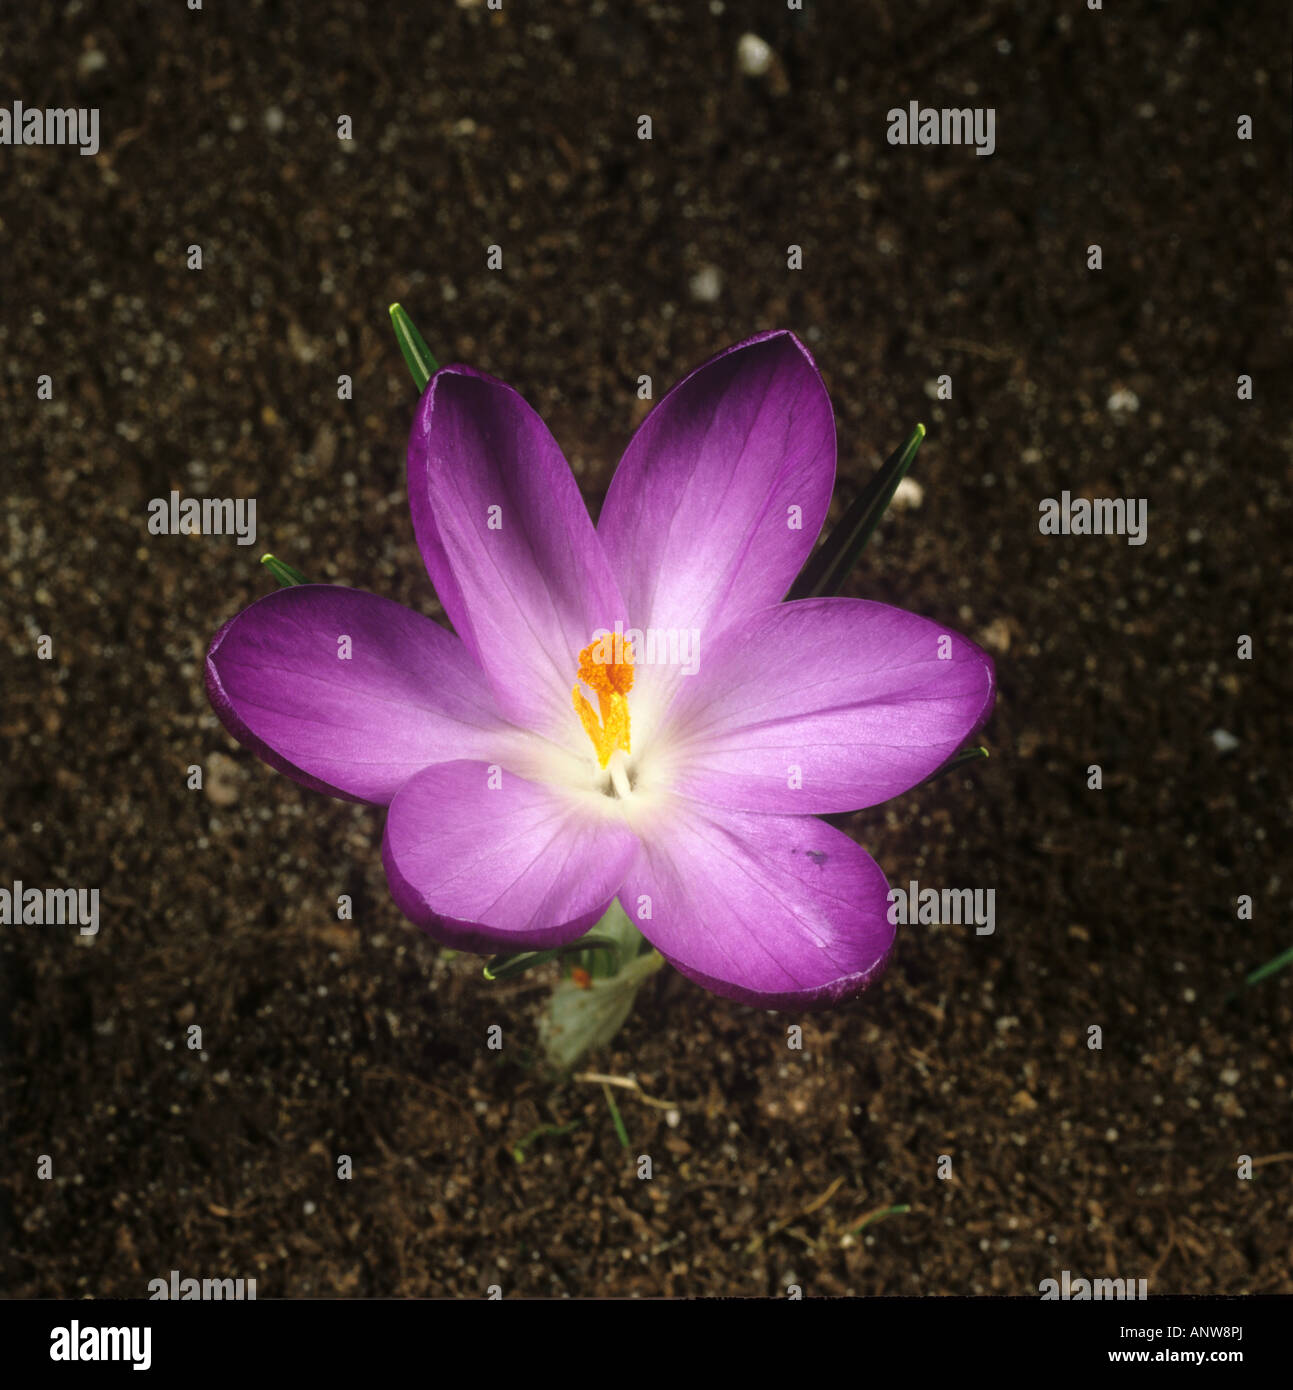 Fifth in a series of photographs showing the opening of a crocus flower Stock Photo